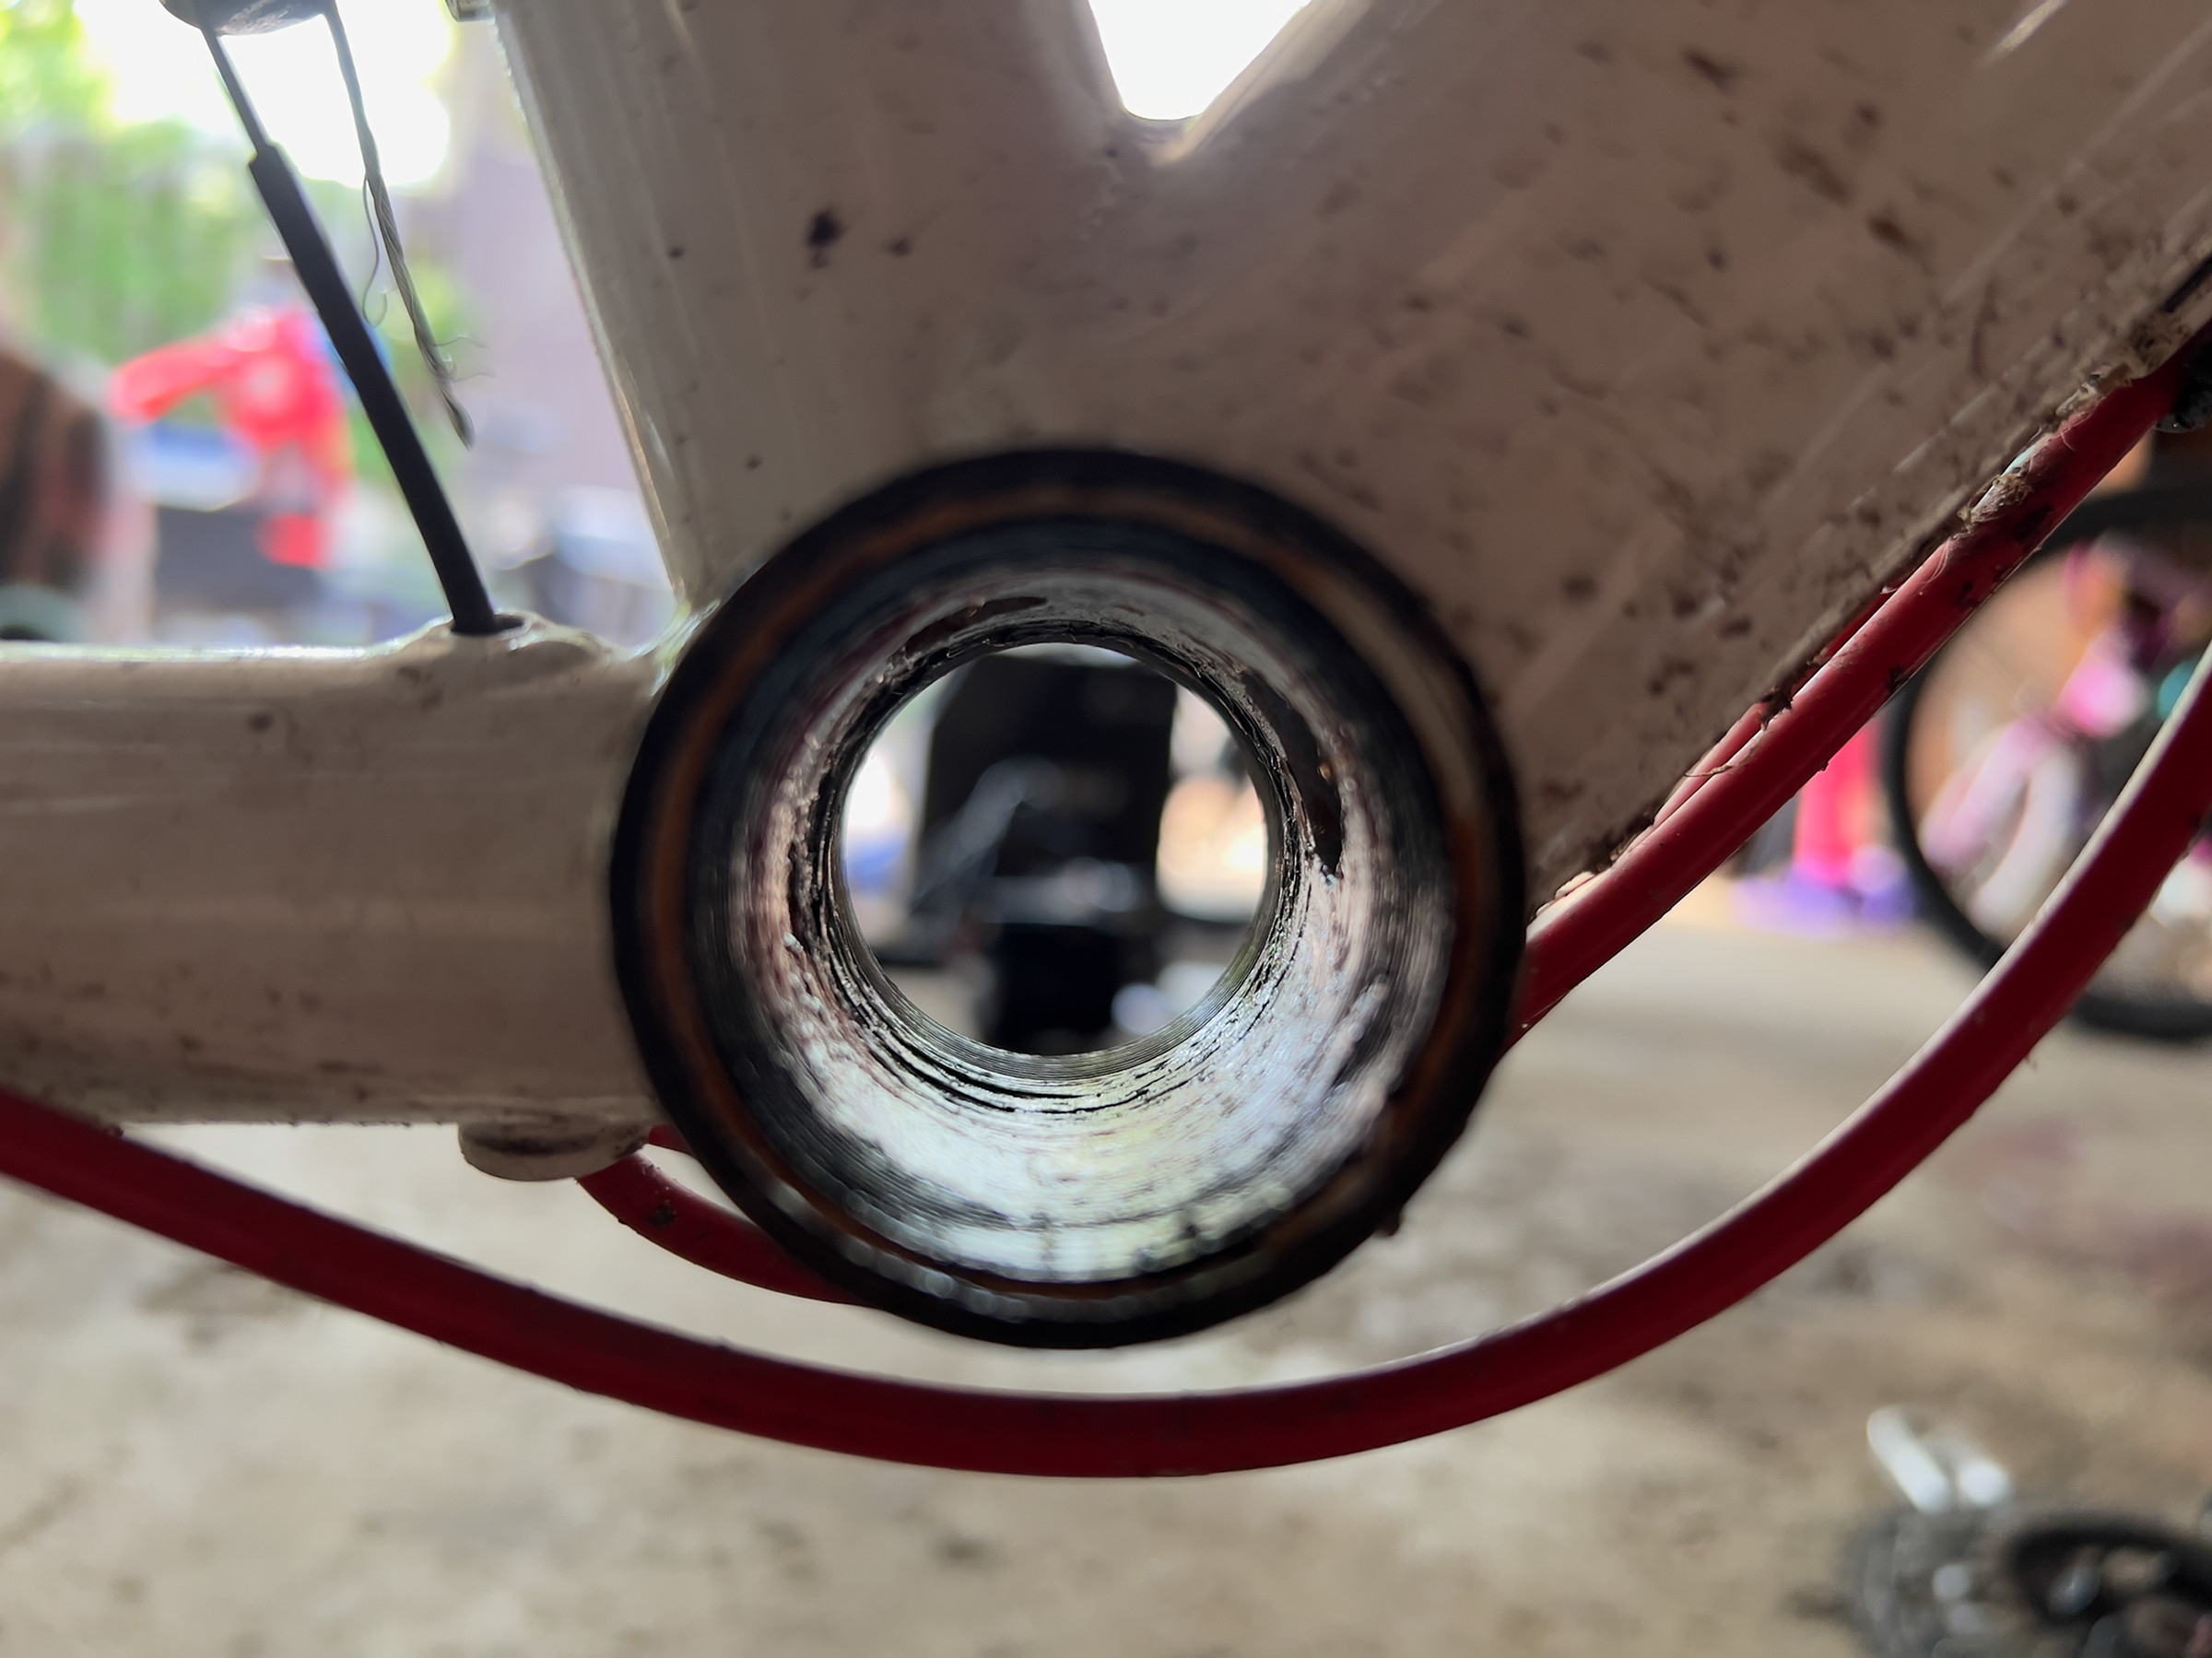 A picture taken through the empty bottom bracket shell after the bottom bracket has been removed but the grease hasn’t been cleaned out yet.